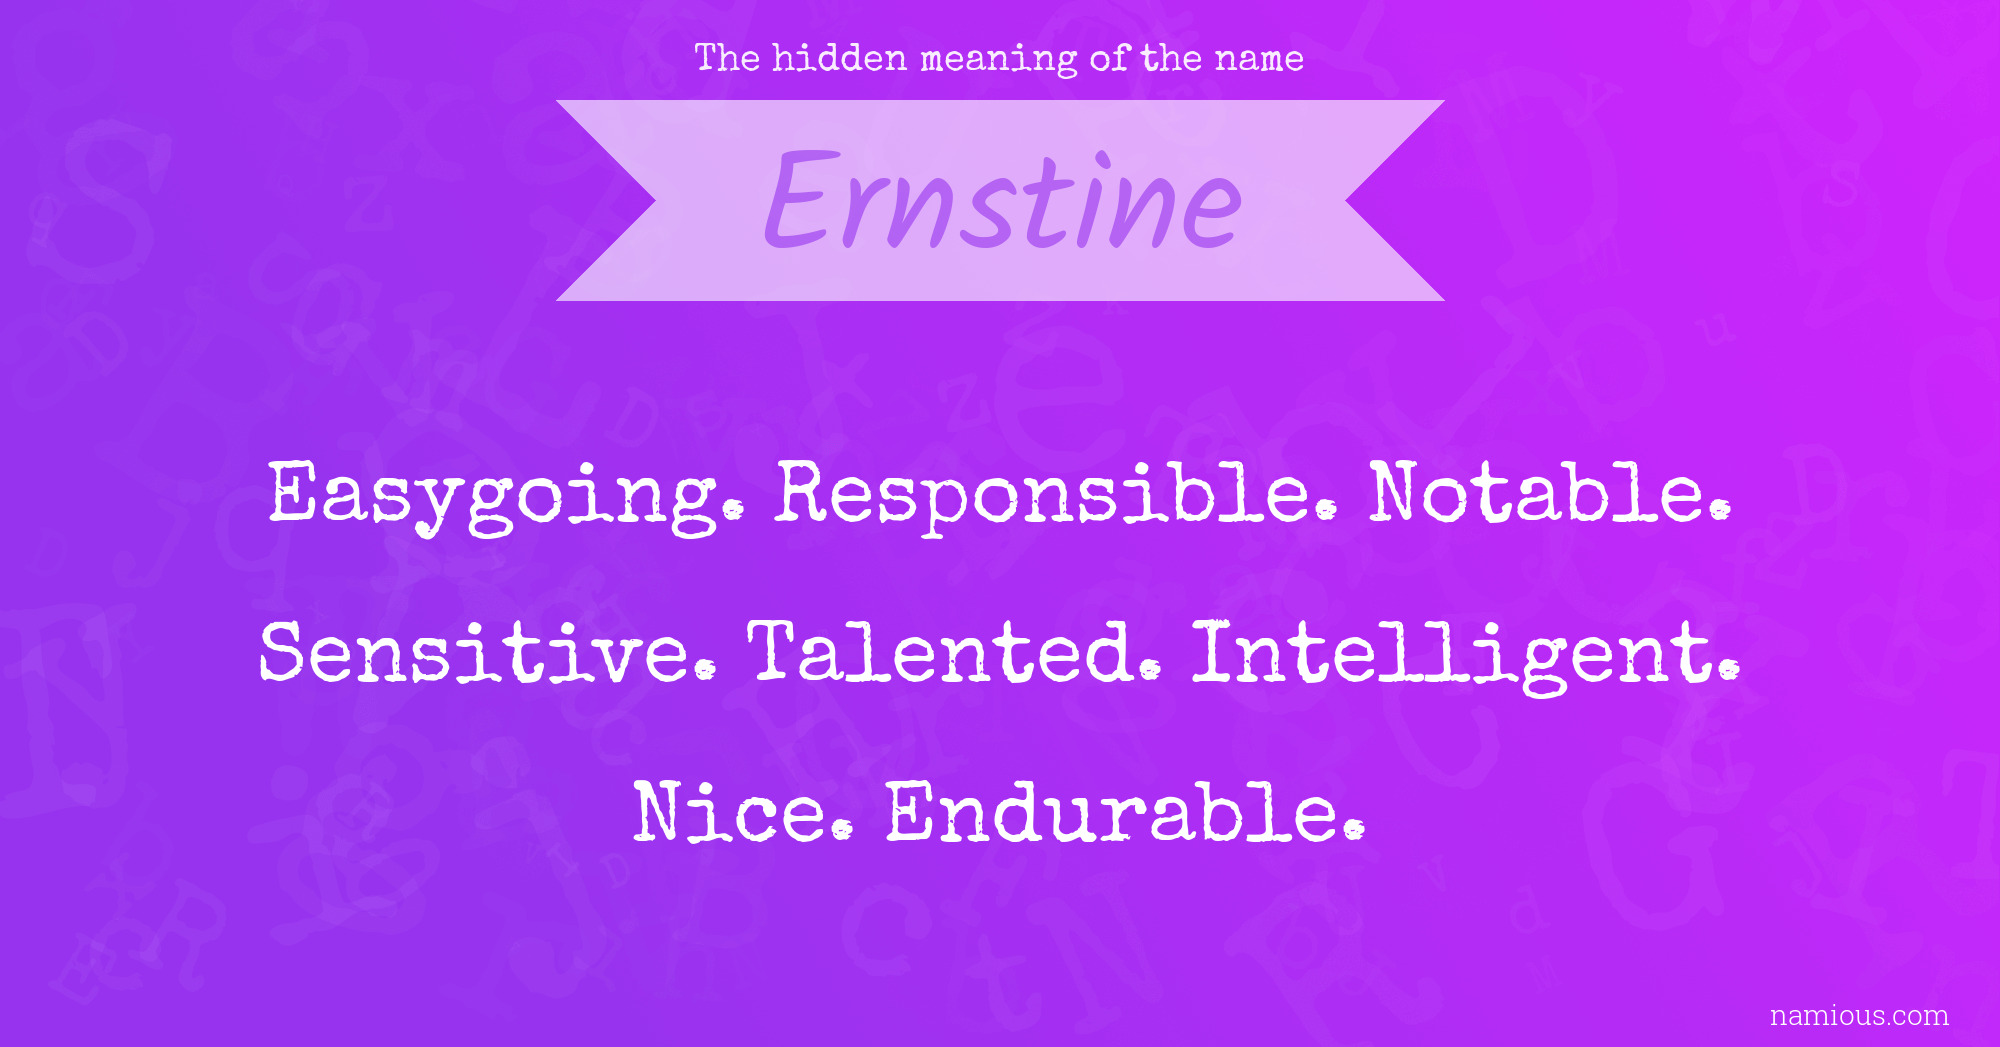 The hidden meaning of the name Ernstine